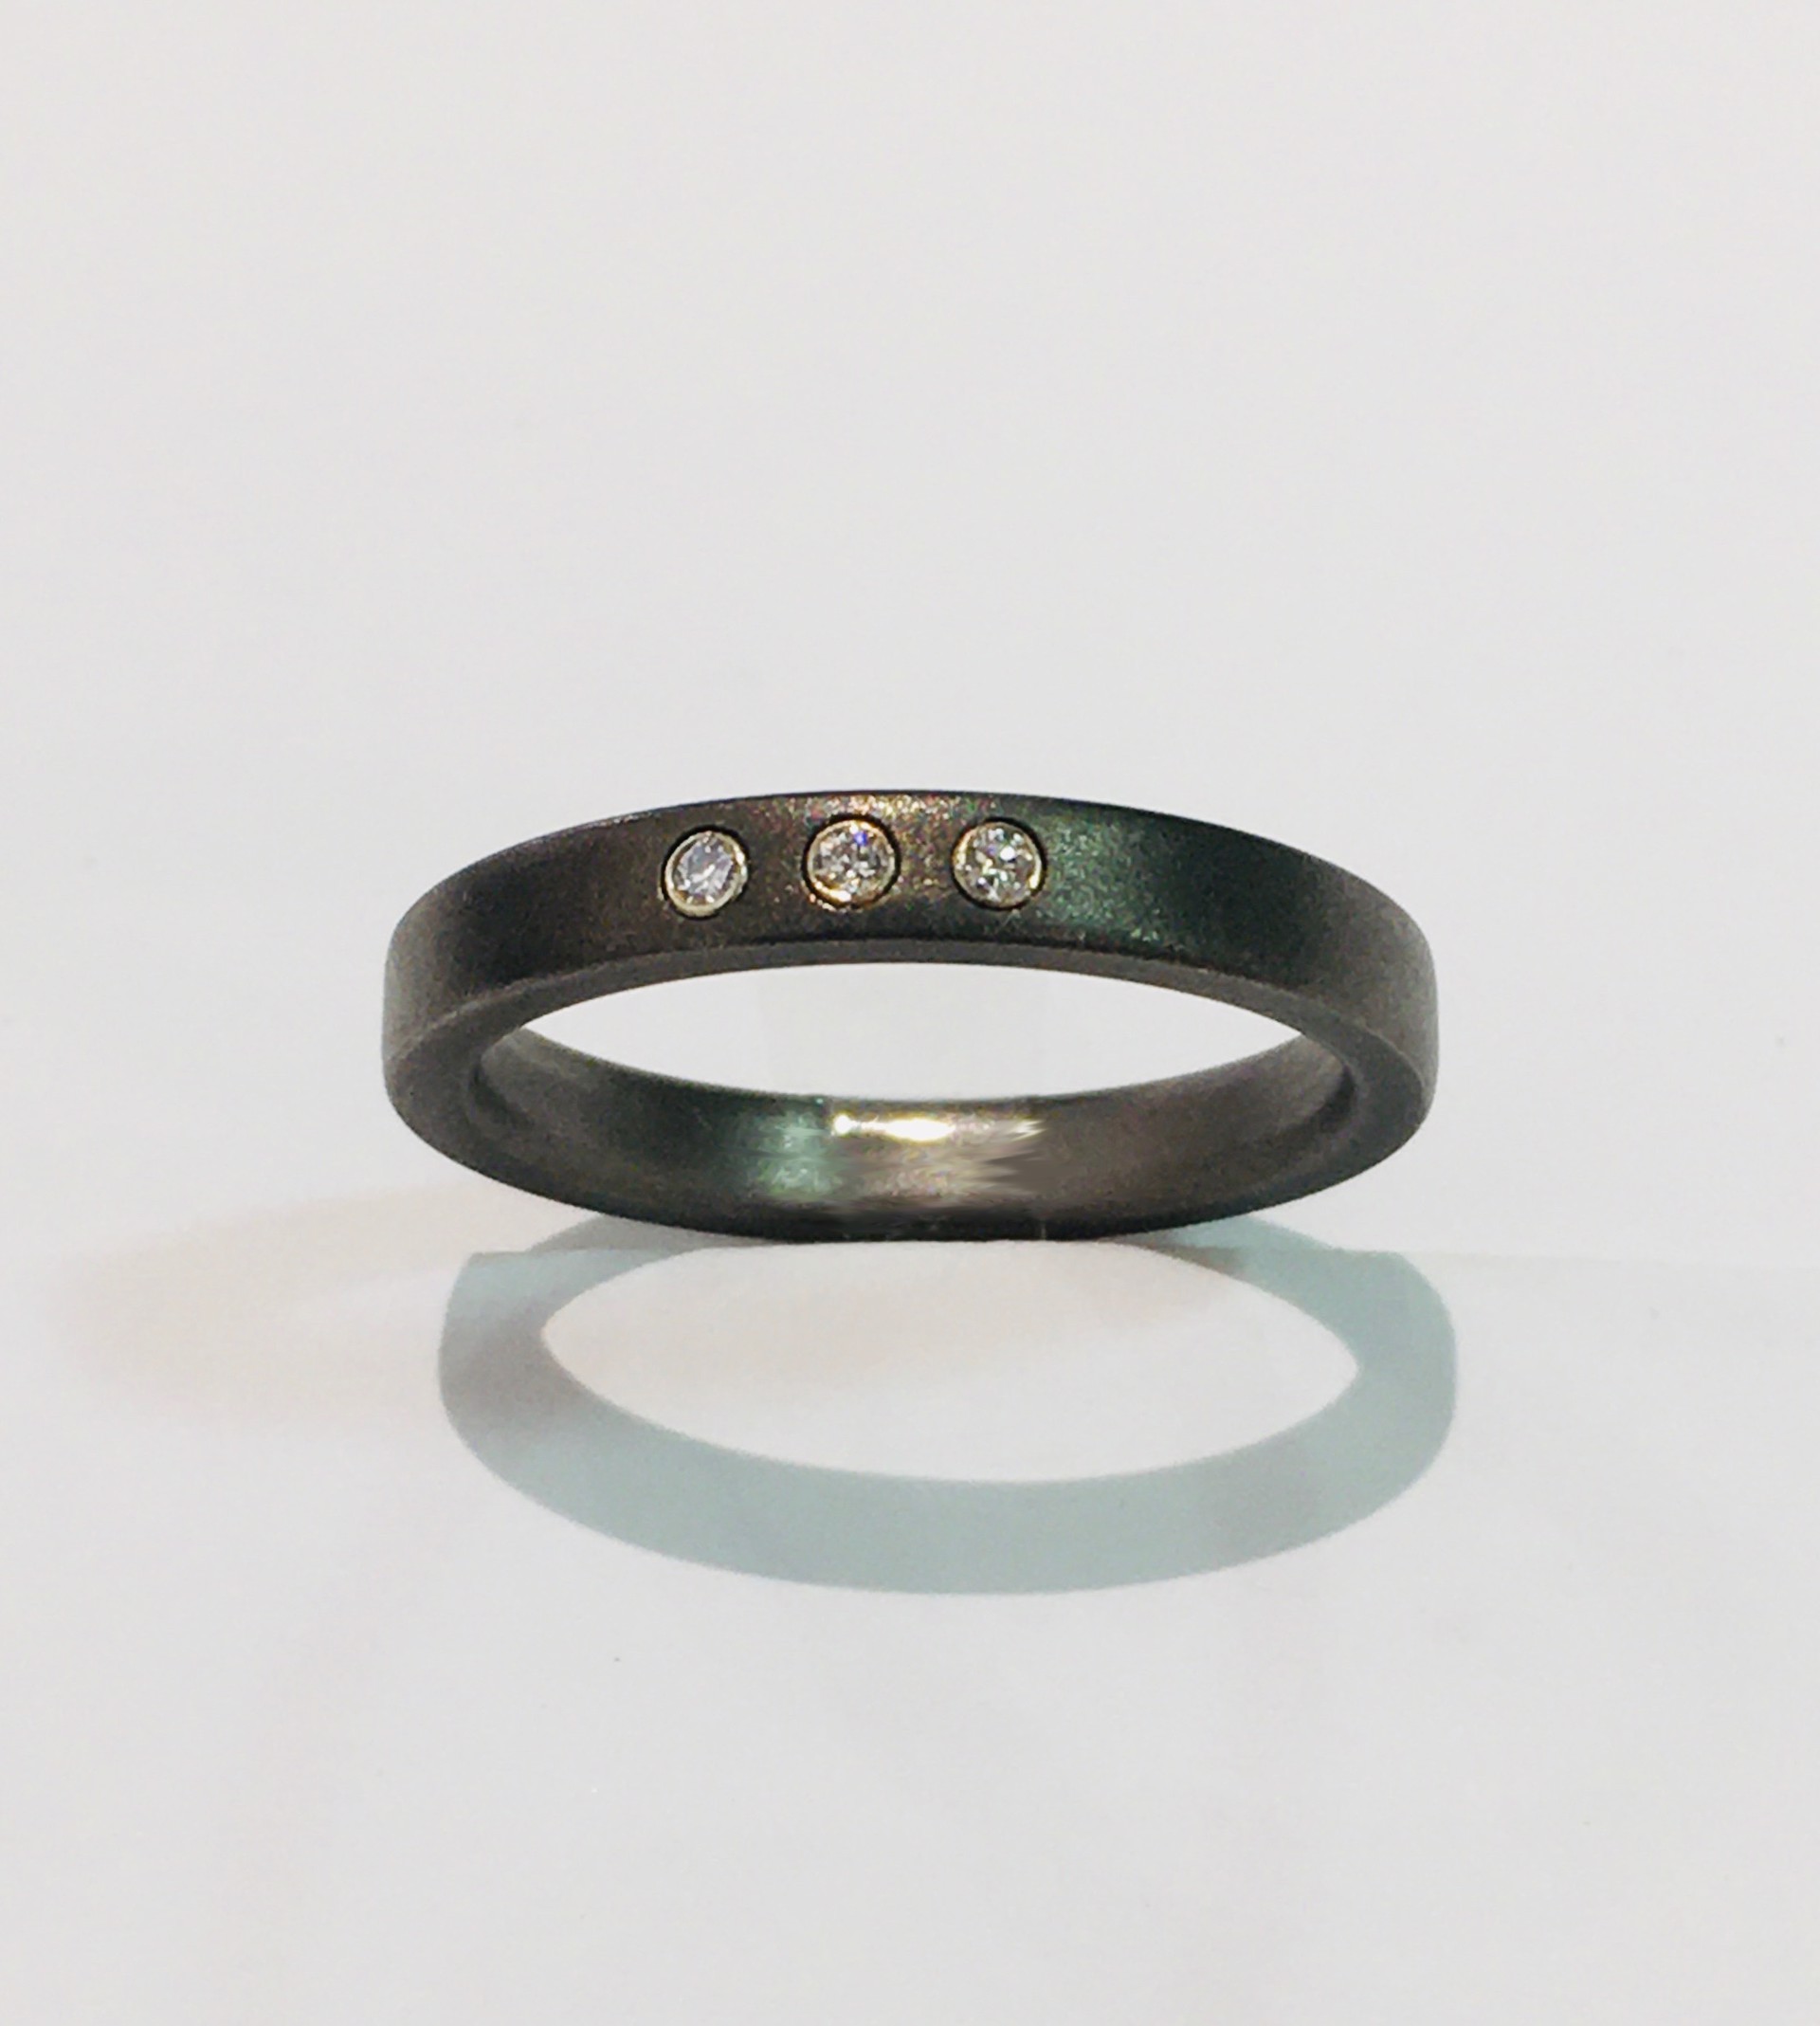 Titanium Band with Diamonds (size 6.875) by WES & GOLD